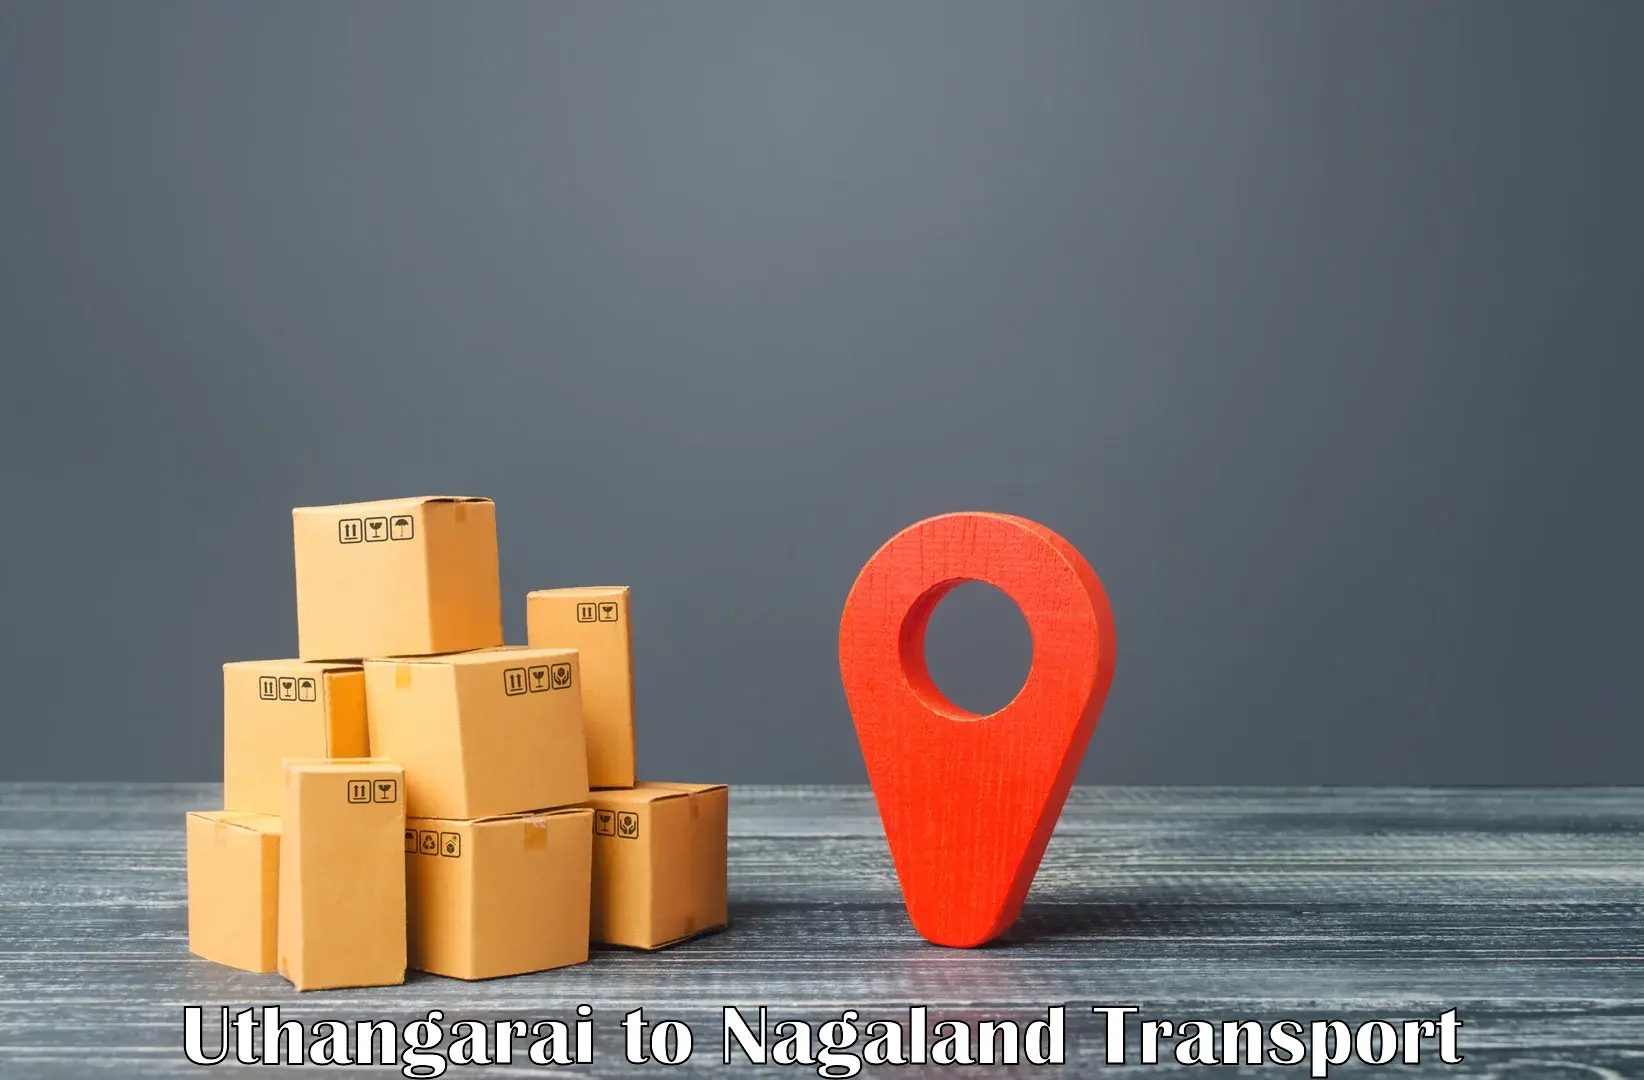 Transport bike from one state to another Uthangarai to Nagaland